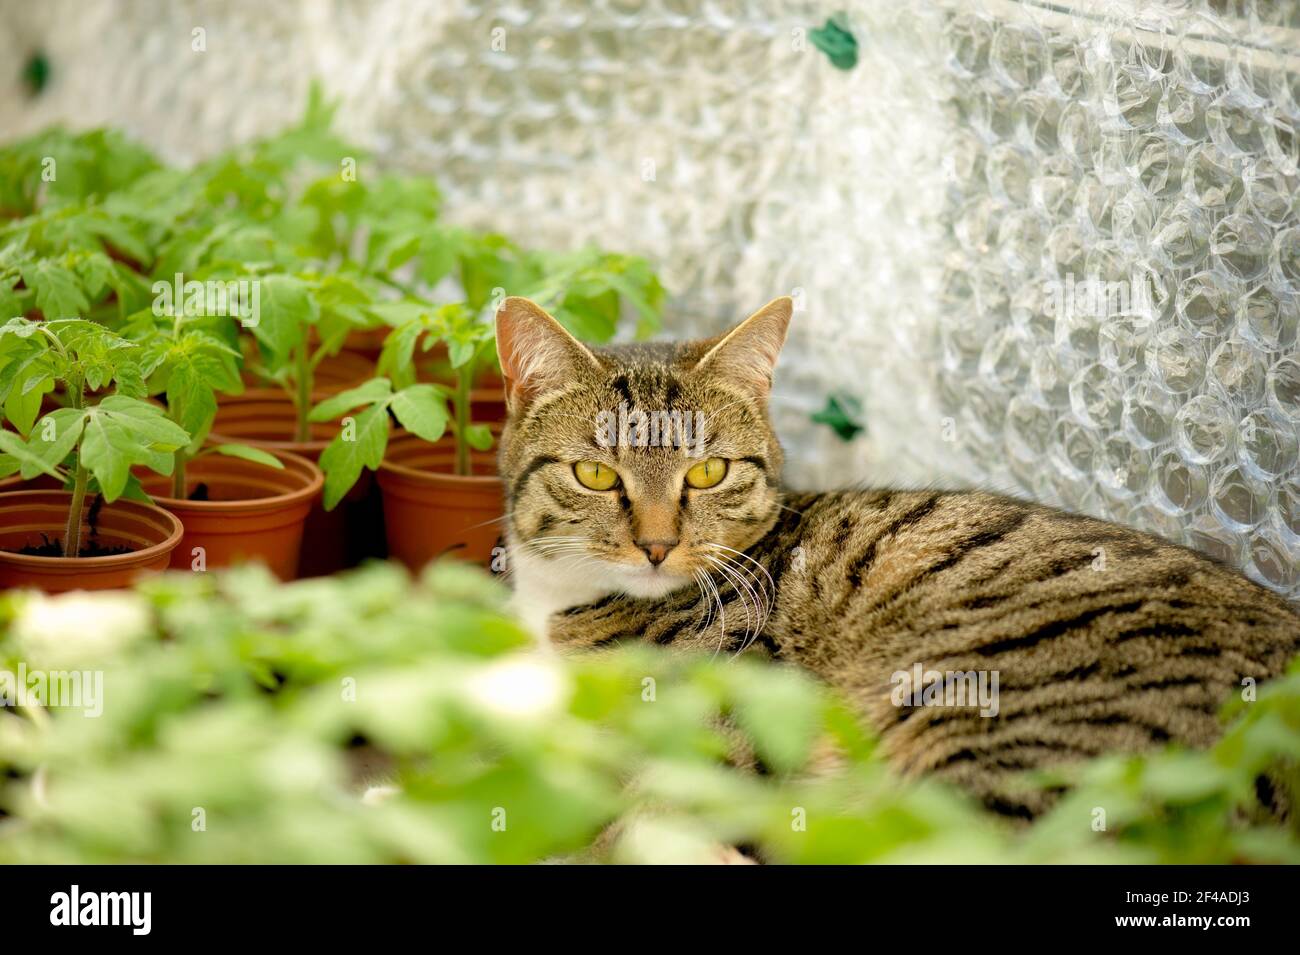 Tabby cat relaxing amongst a small pots of tomato plants in the greenhouse. Stock Photo